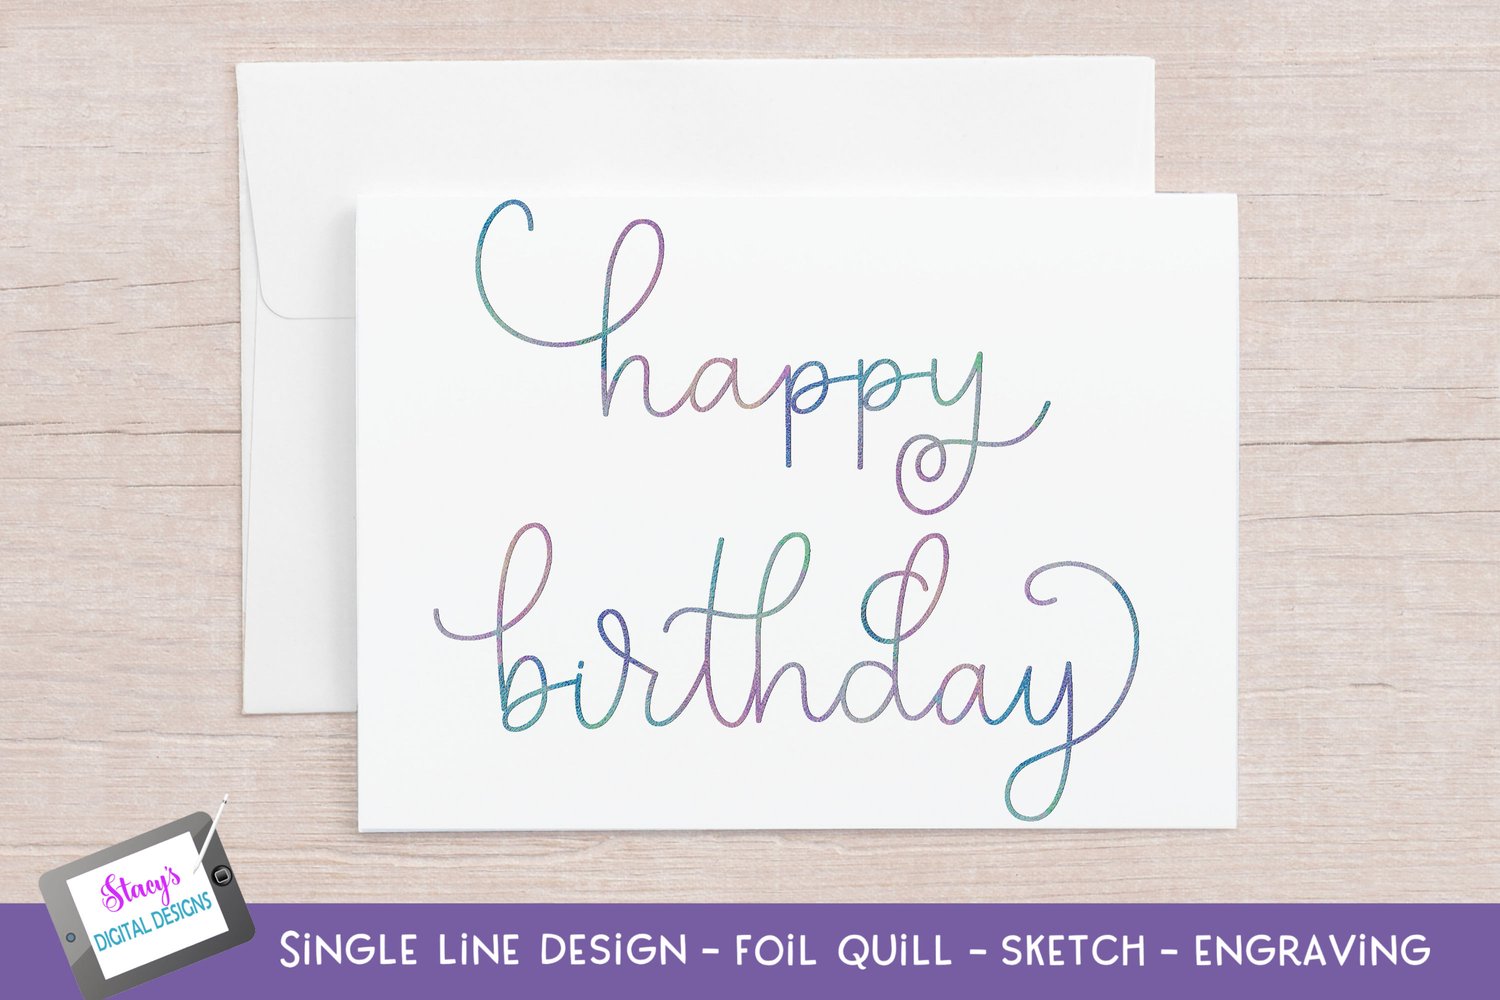 Foil Quill Birthday Card SVG File, Single Line svg, Sketch s